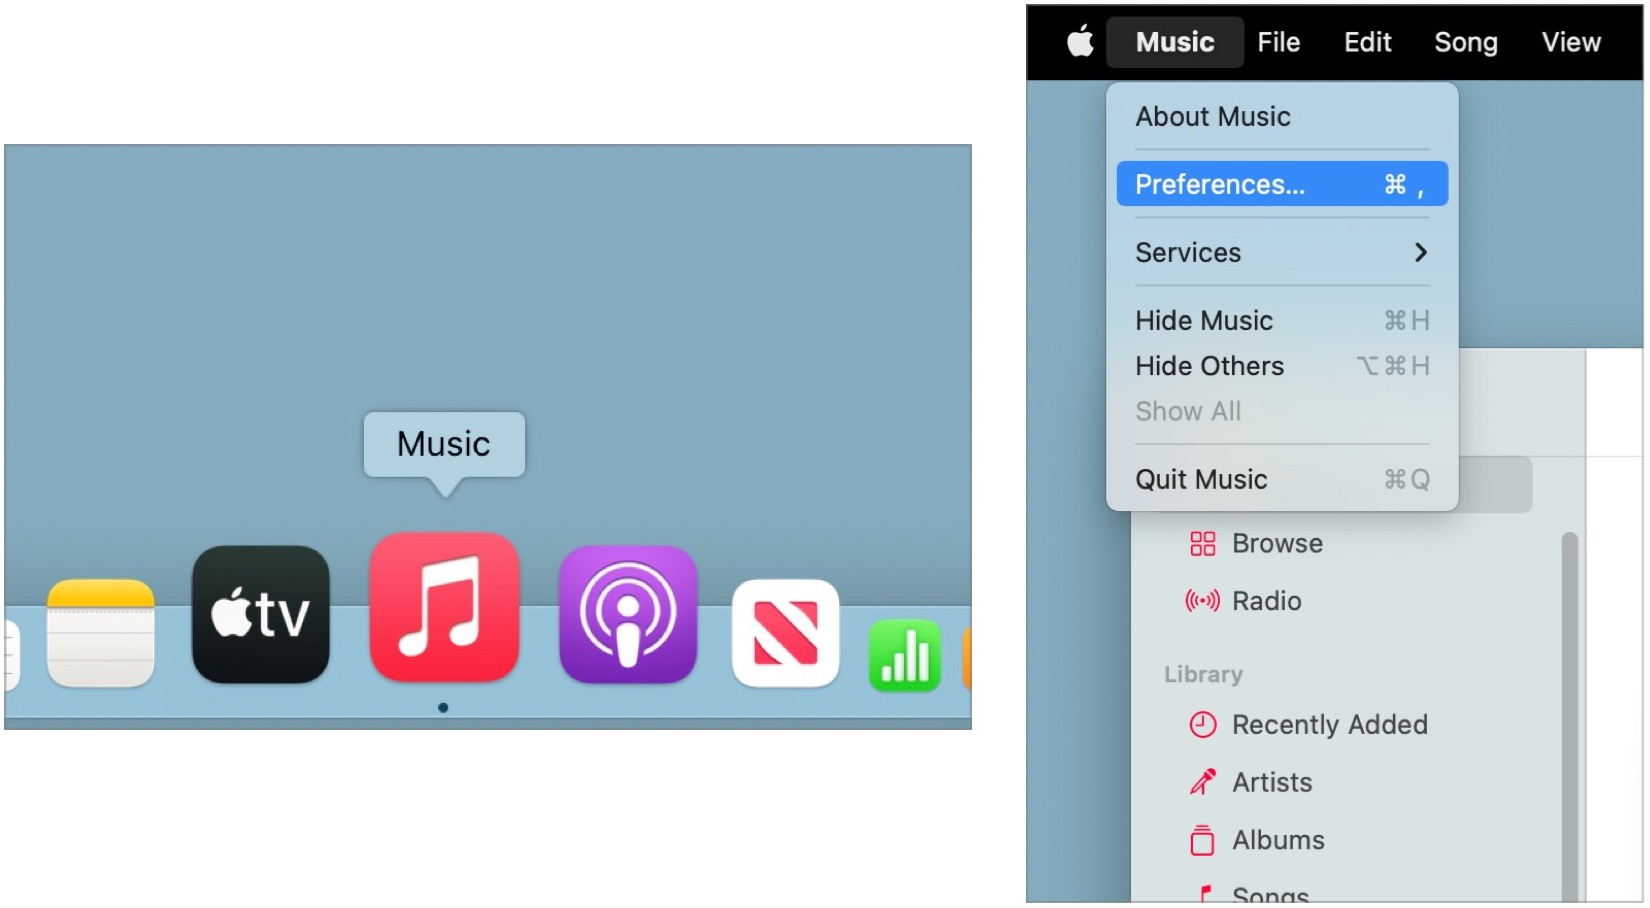 To setup lossless audio on Mac, open the Apple Music app. Choose Music on the toolbar, then select Preferences from the pull-down menu.